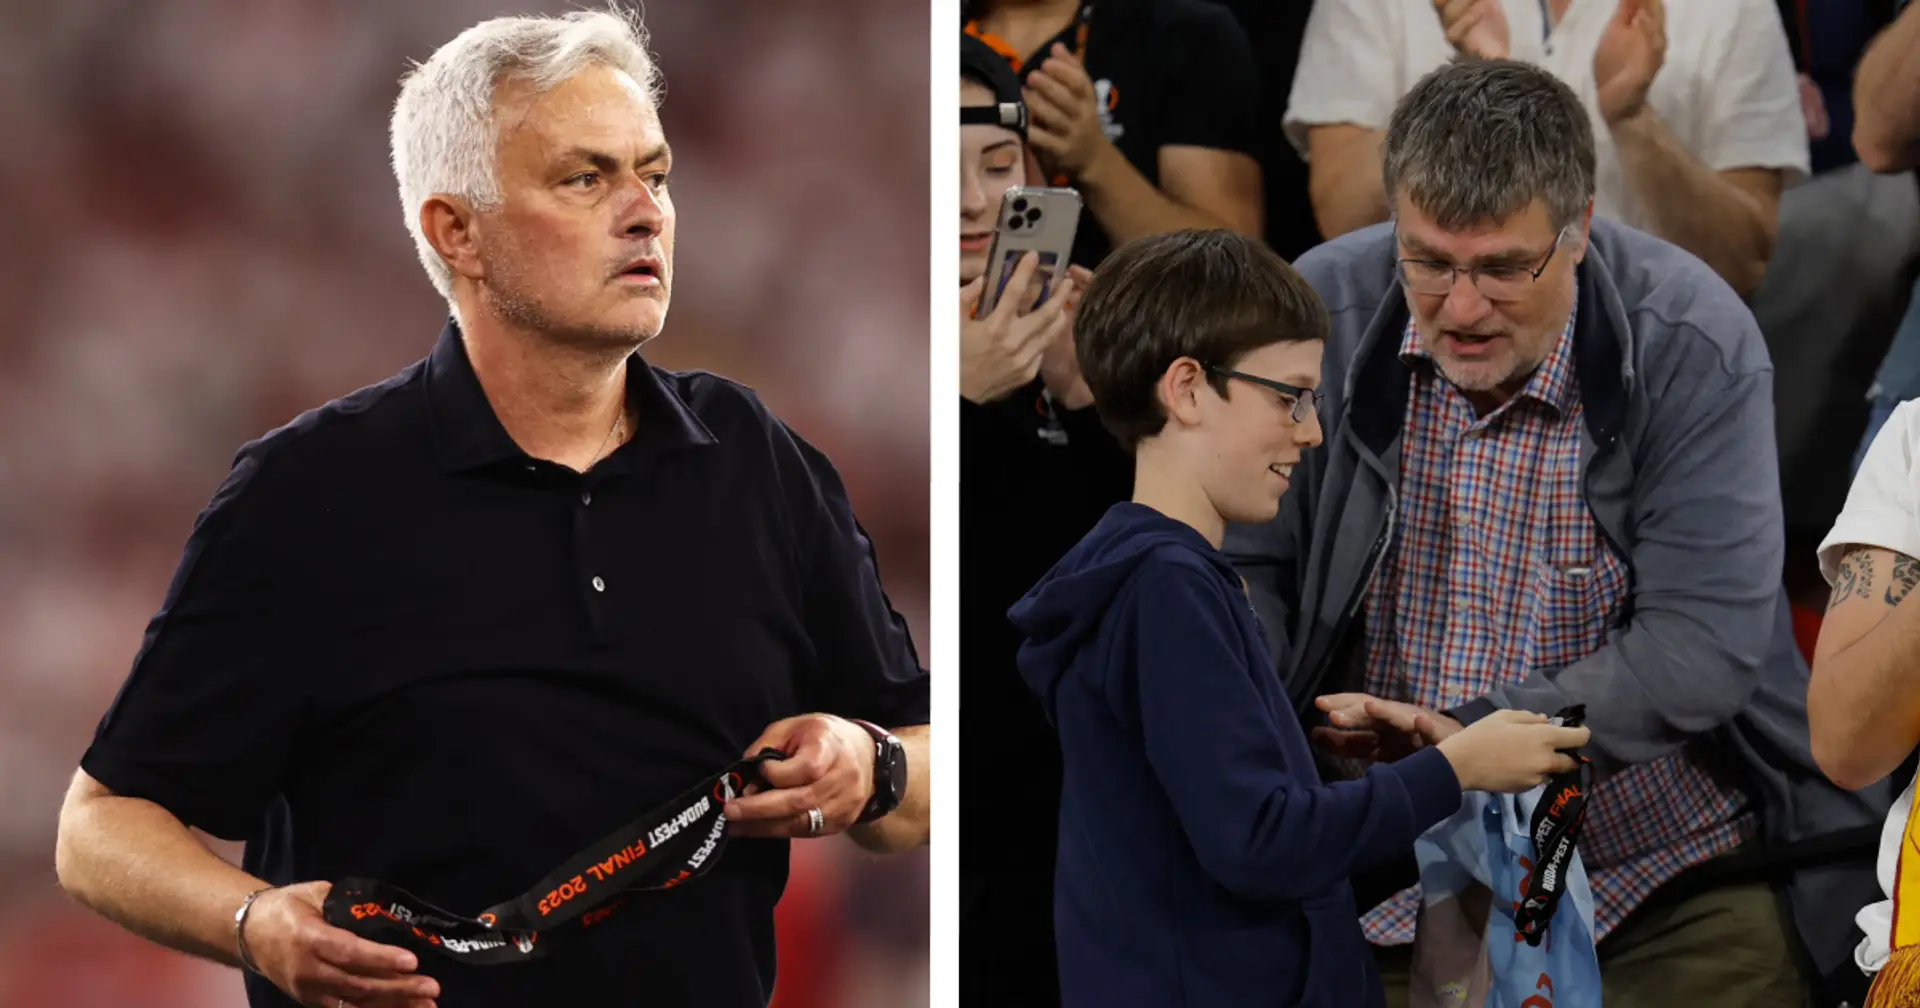 Jose Mourinho chucks his runner-up Europa League medal to bemused kid in the stands - spotted